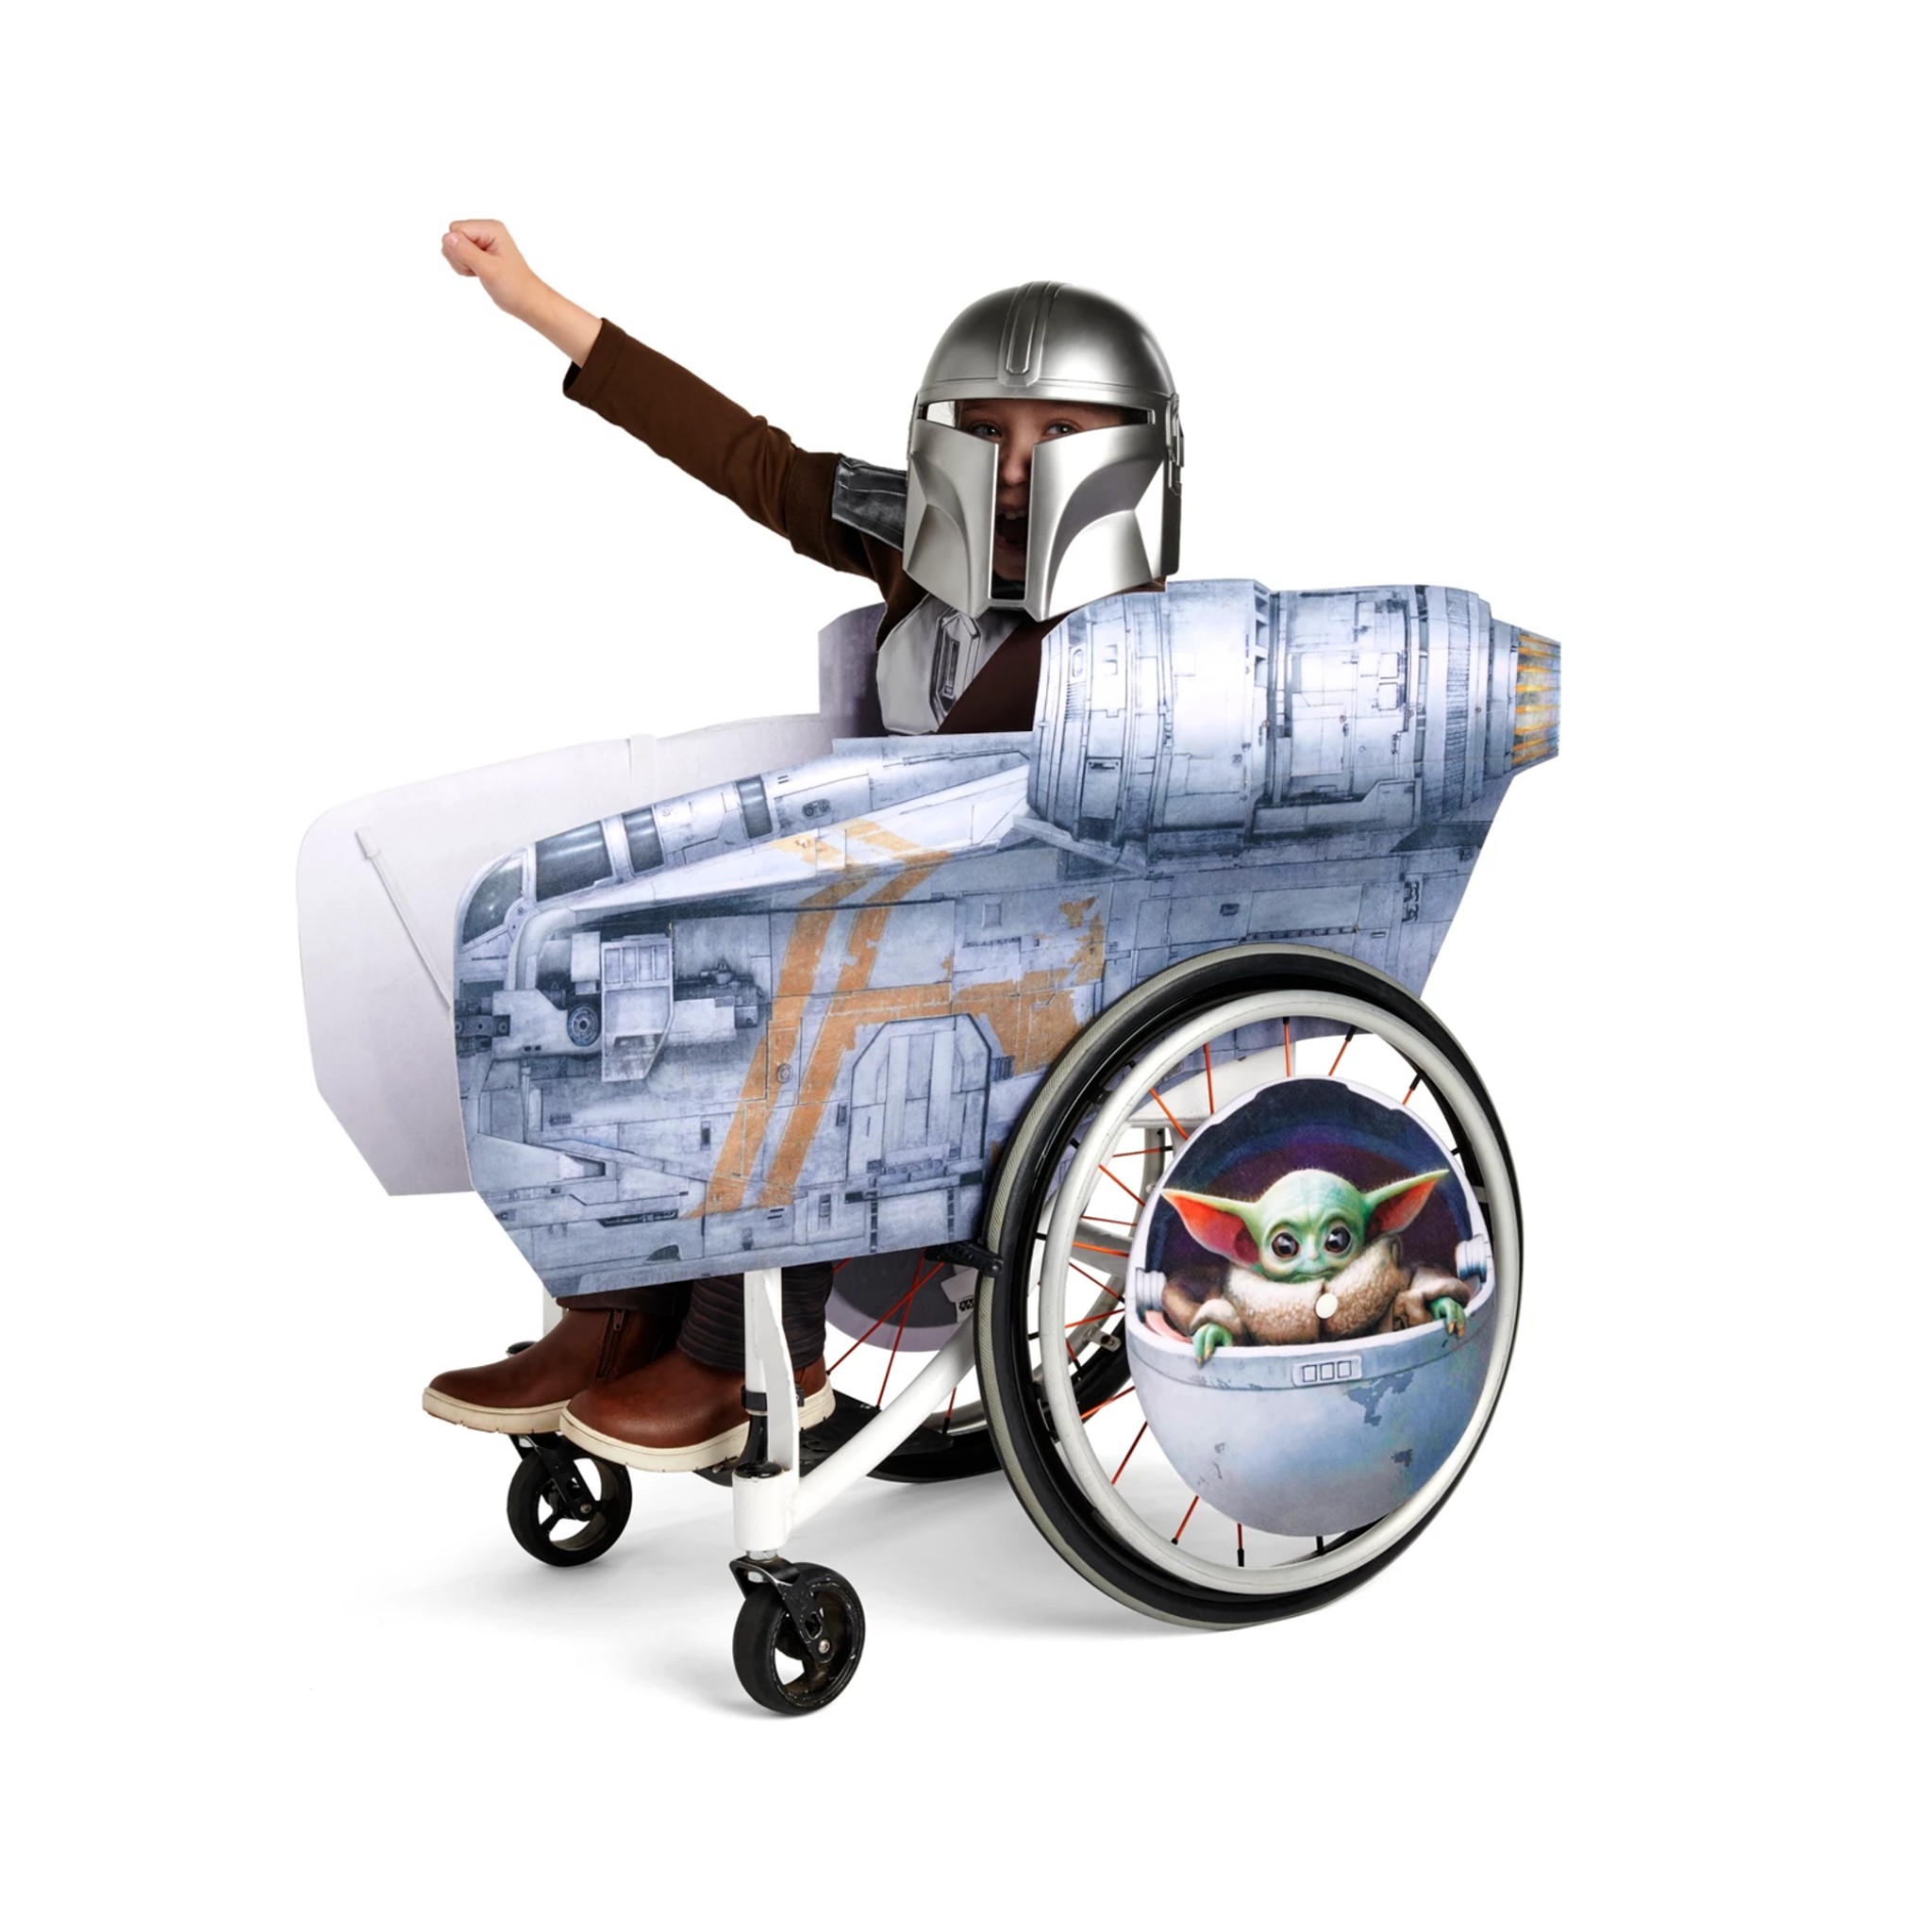 ShopDisney/Star Wars: The Mandalorian Adaptive Costume Collection for Kids